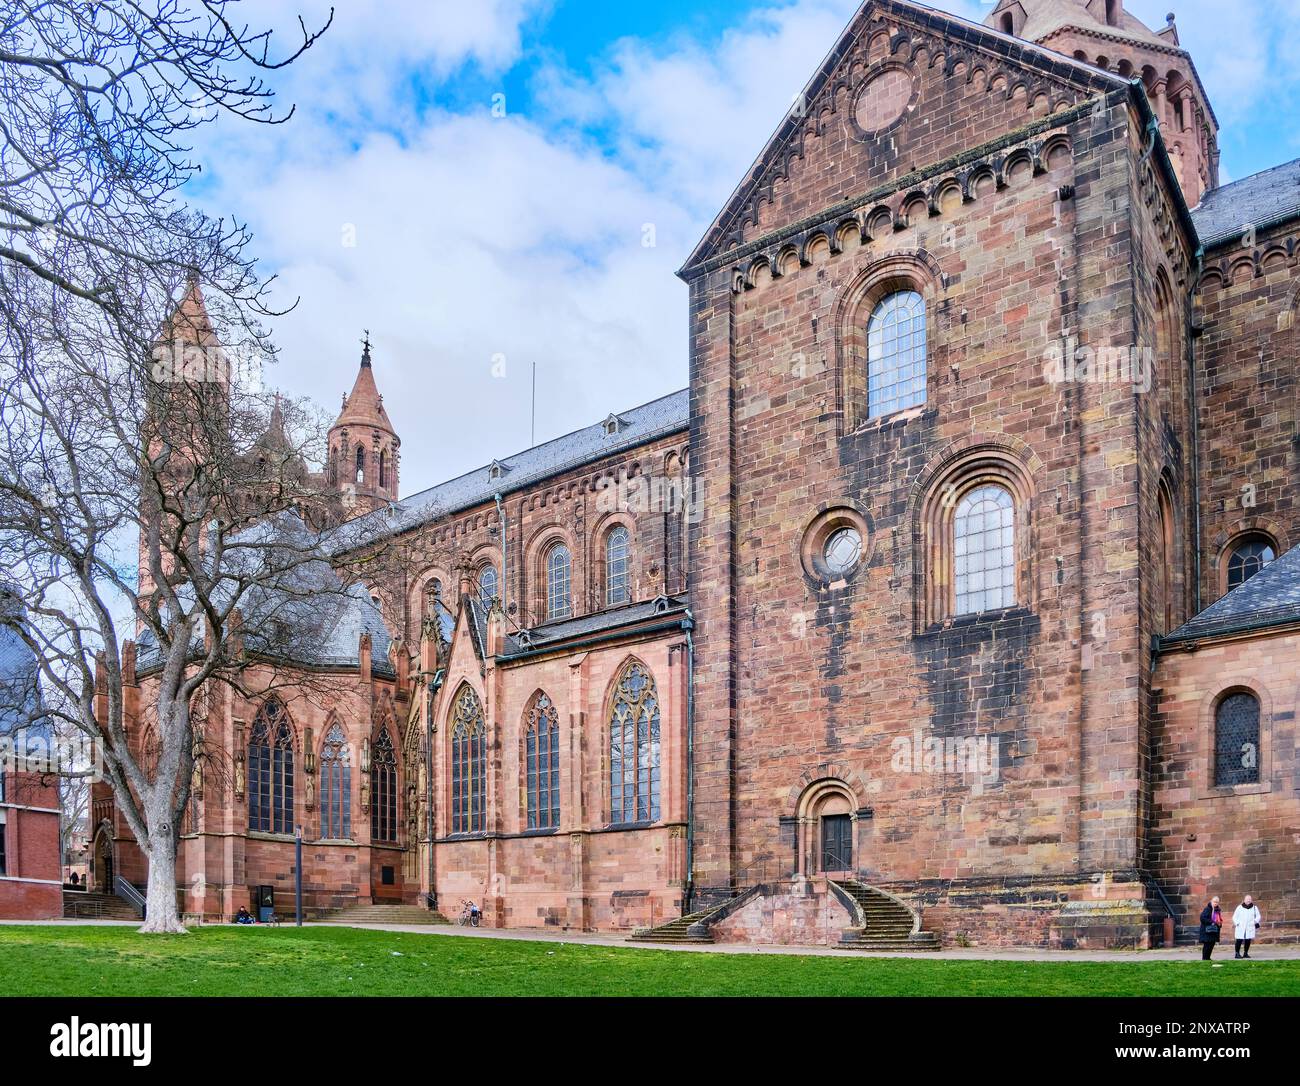 The Imperial Cathedral of St. Peter in the city of Worms, Rhineland-Palatinate, Germany, Europe. Stock Photo